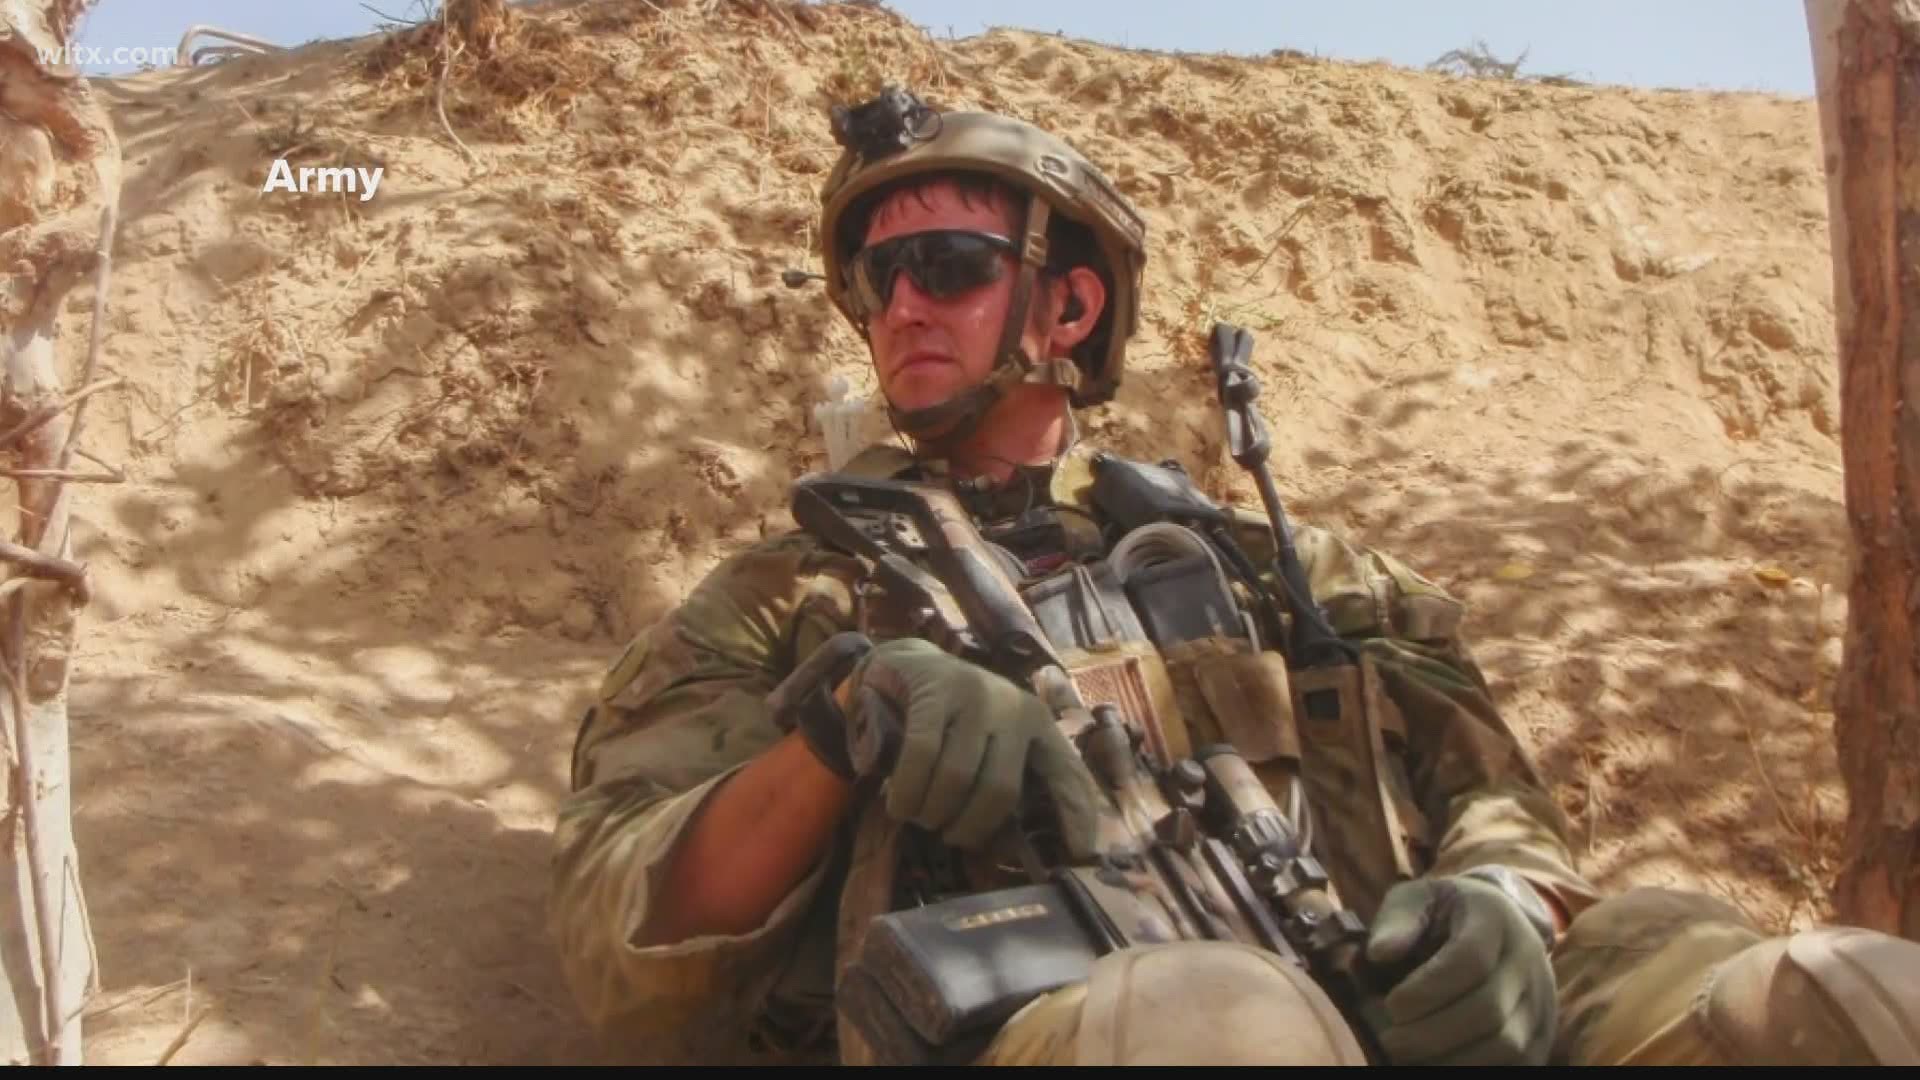 Army Sgt. Major Thomas Payne of South Carolina will receive the Medal of Honor on September 11. That's the anniversary of the day he signed up for the military.